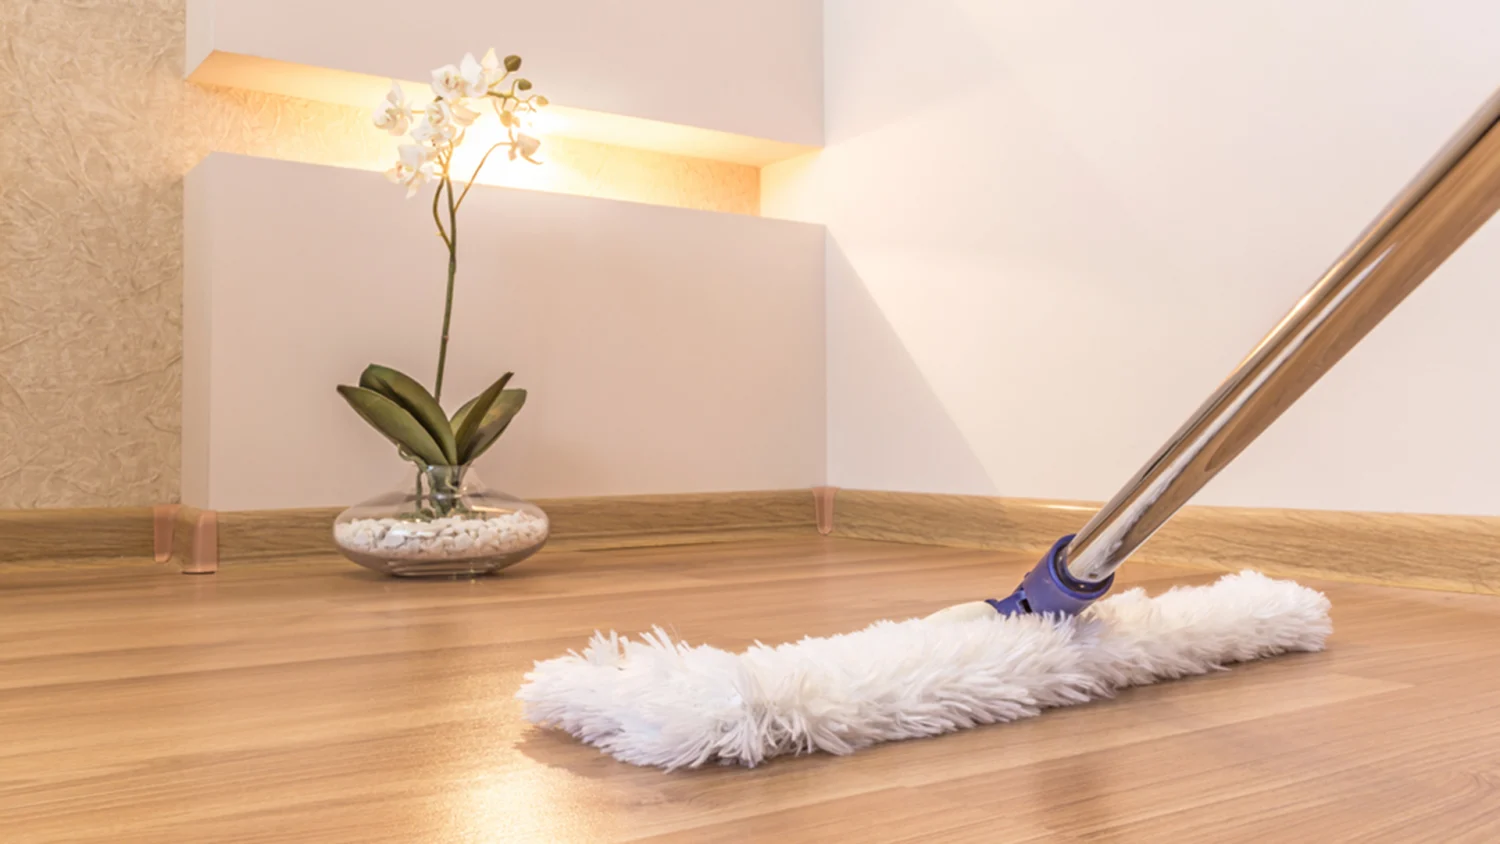 What Should You Not Clean Hardwood Floors With